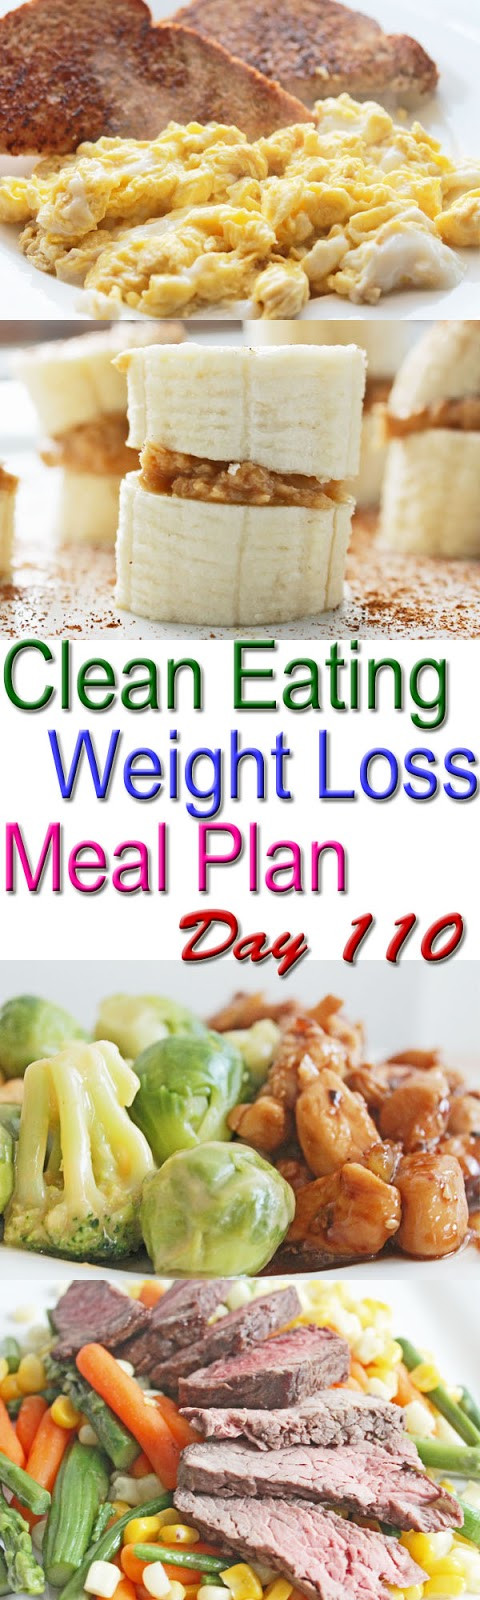 Clean Eating Diet Plan For Weight Loss
 Clean Eating Weight Loss Meal Plan 110